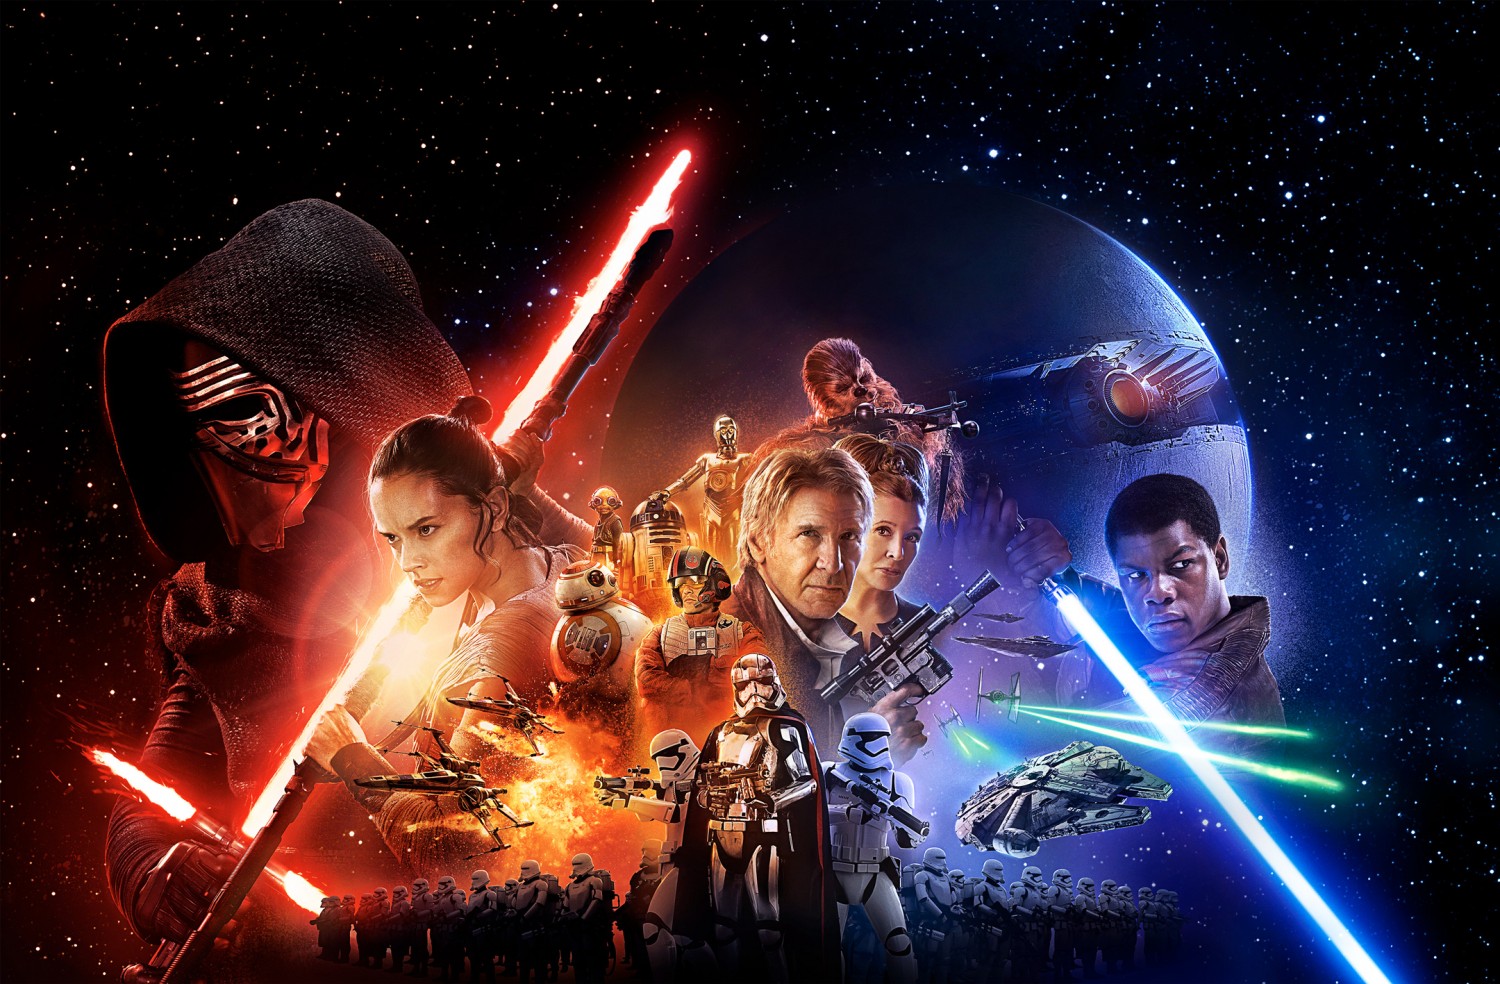 Spoilers galore: let’s talk ‘star wars: the force awakens’